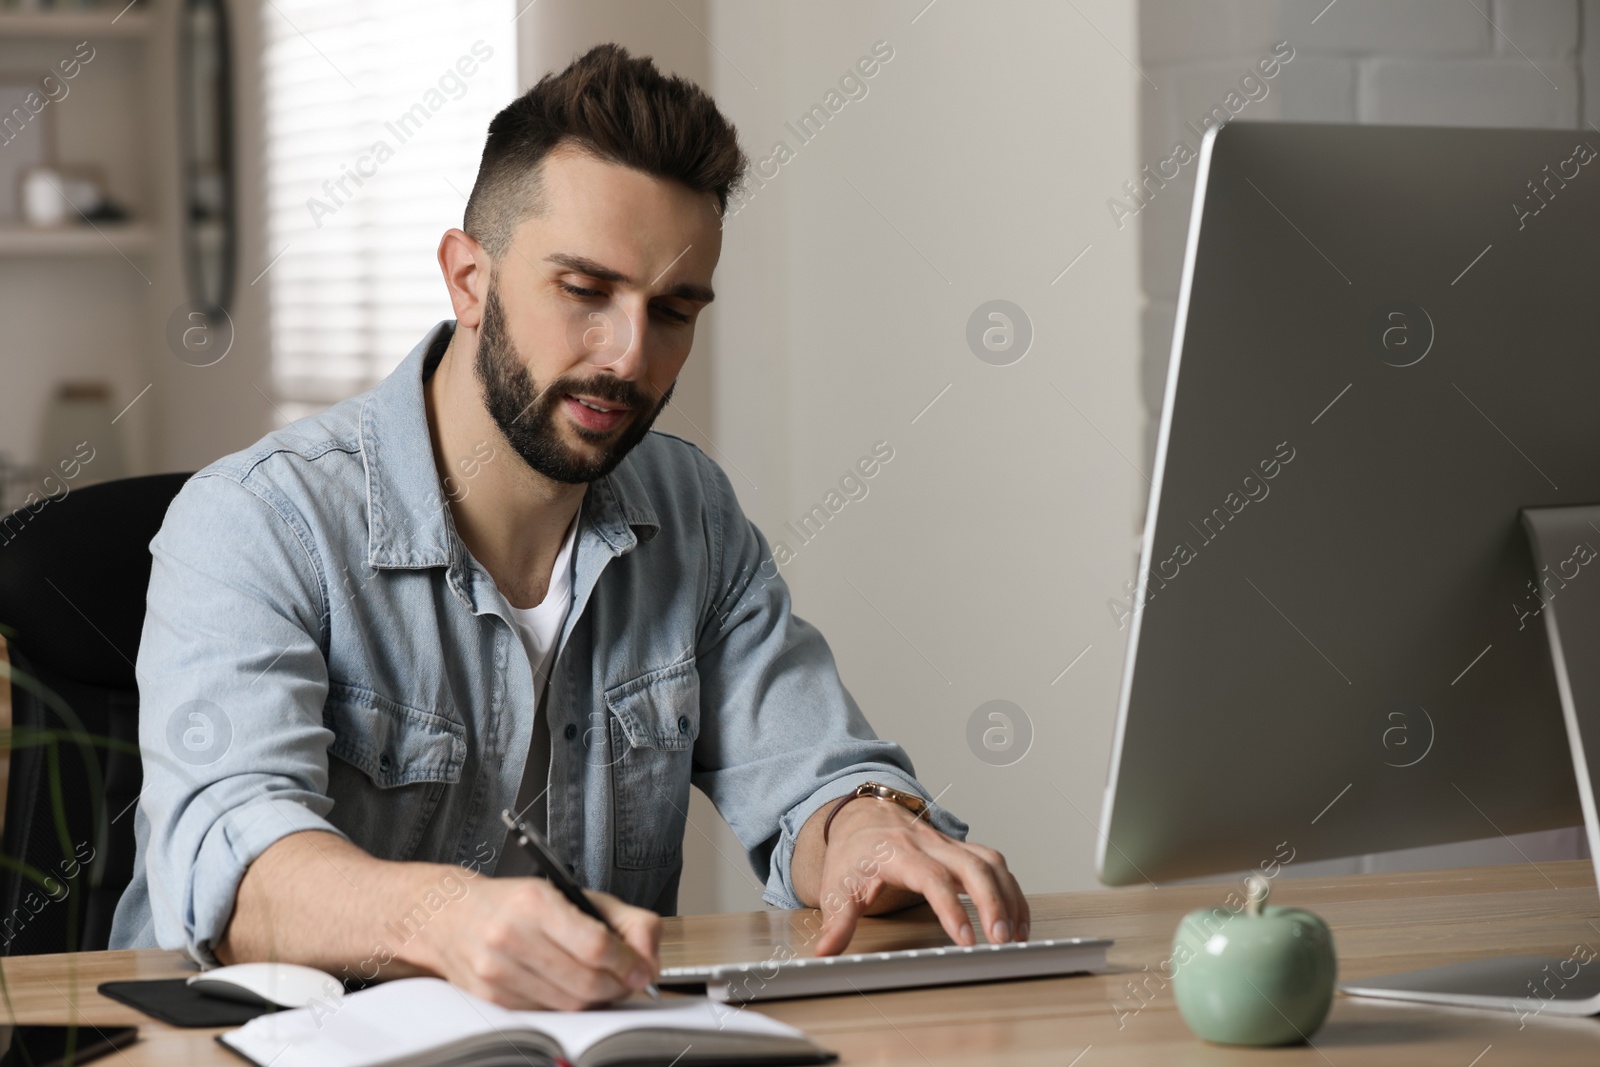 Photo of Man working with computer at table in home office